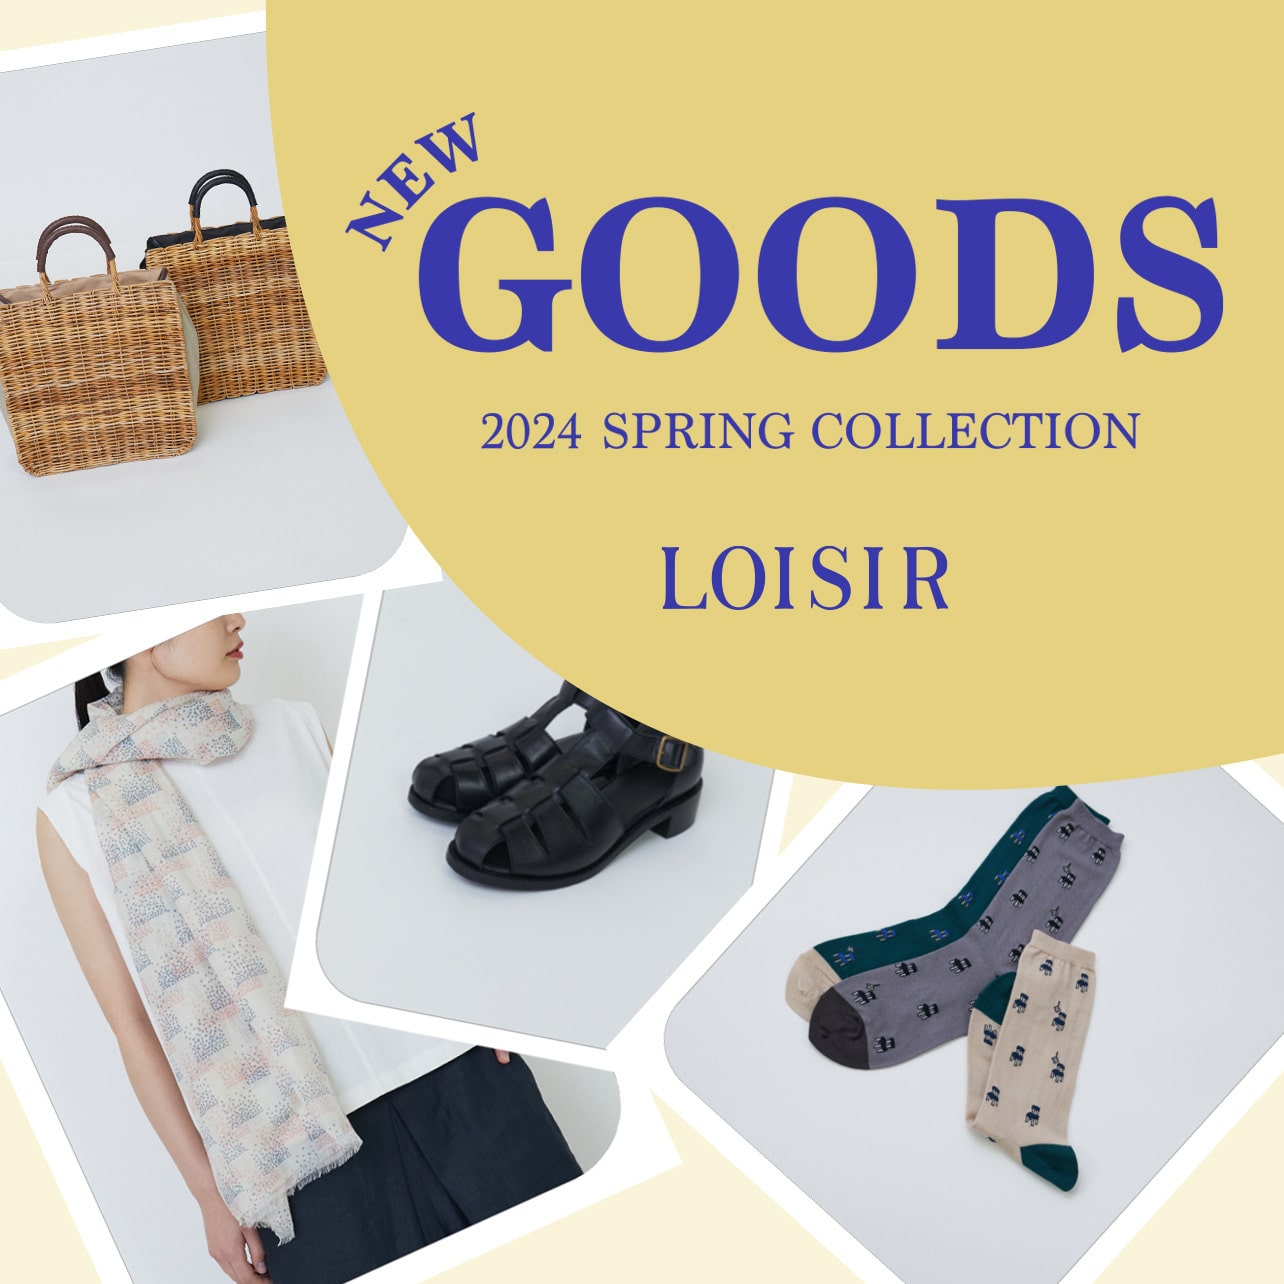 NEW GOODS COLLECTION